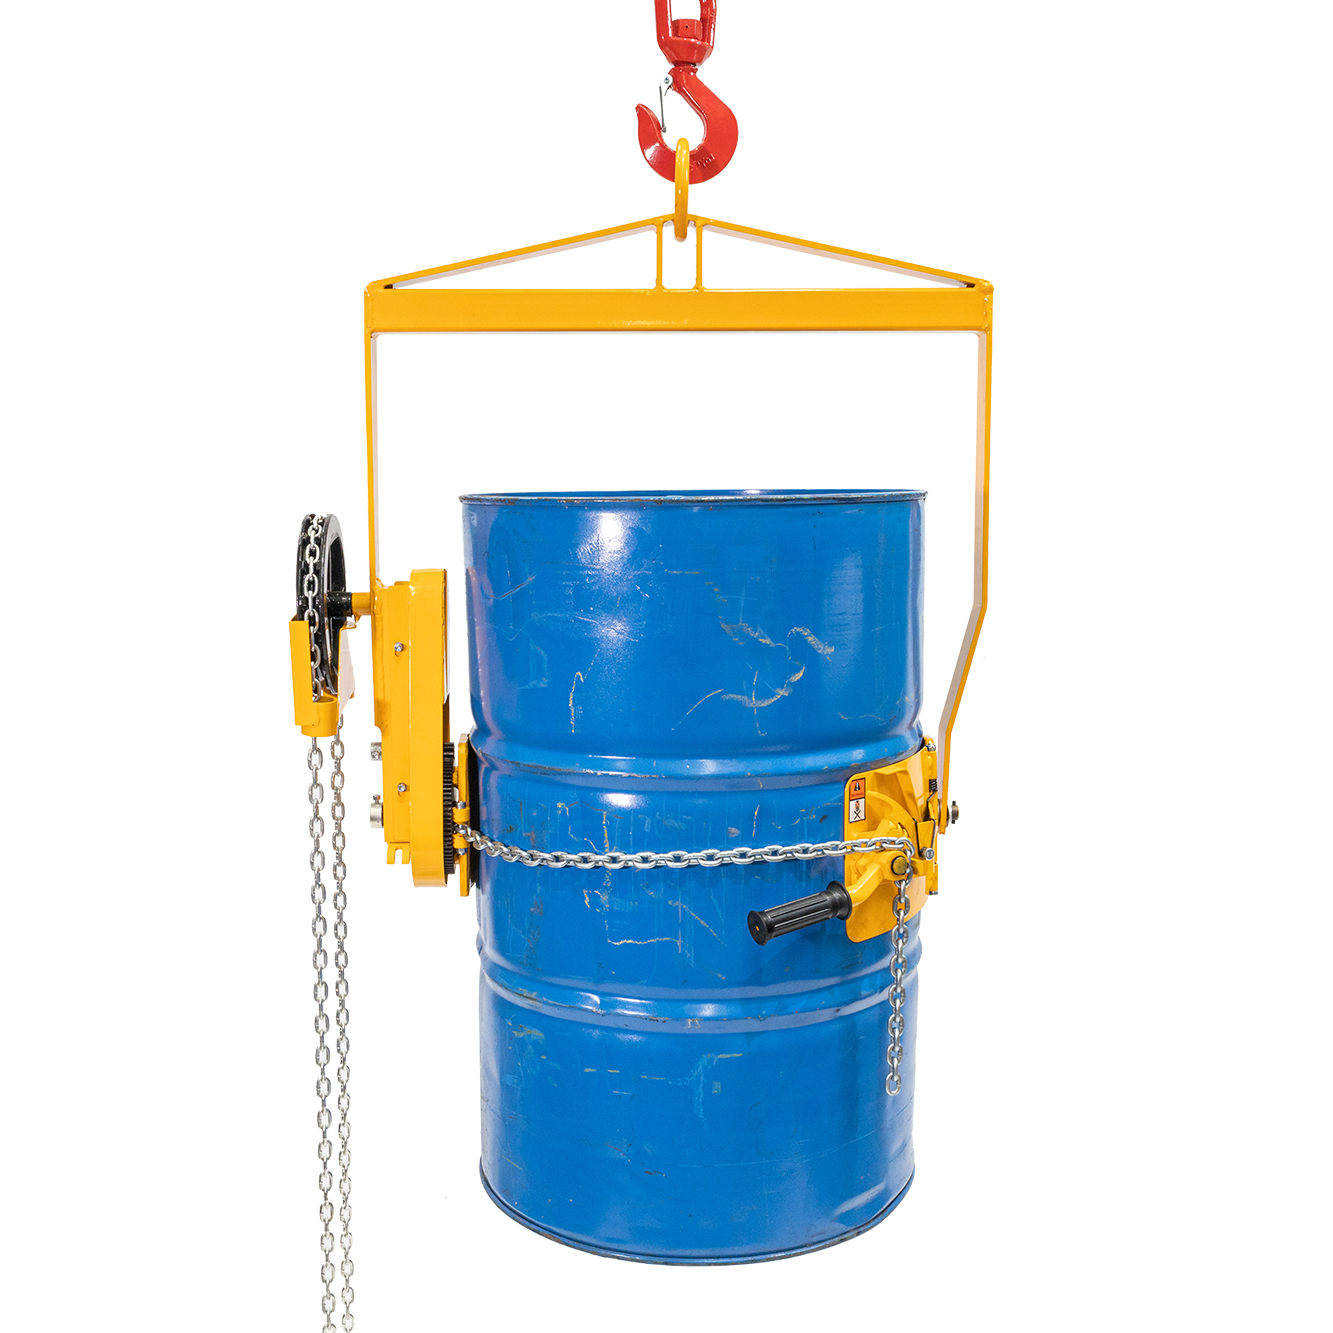 Geared Drum Lifter & Turner (suits plastic and steel drums)